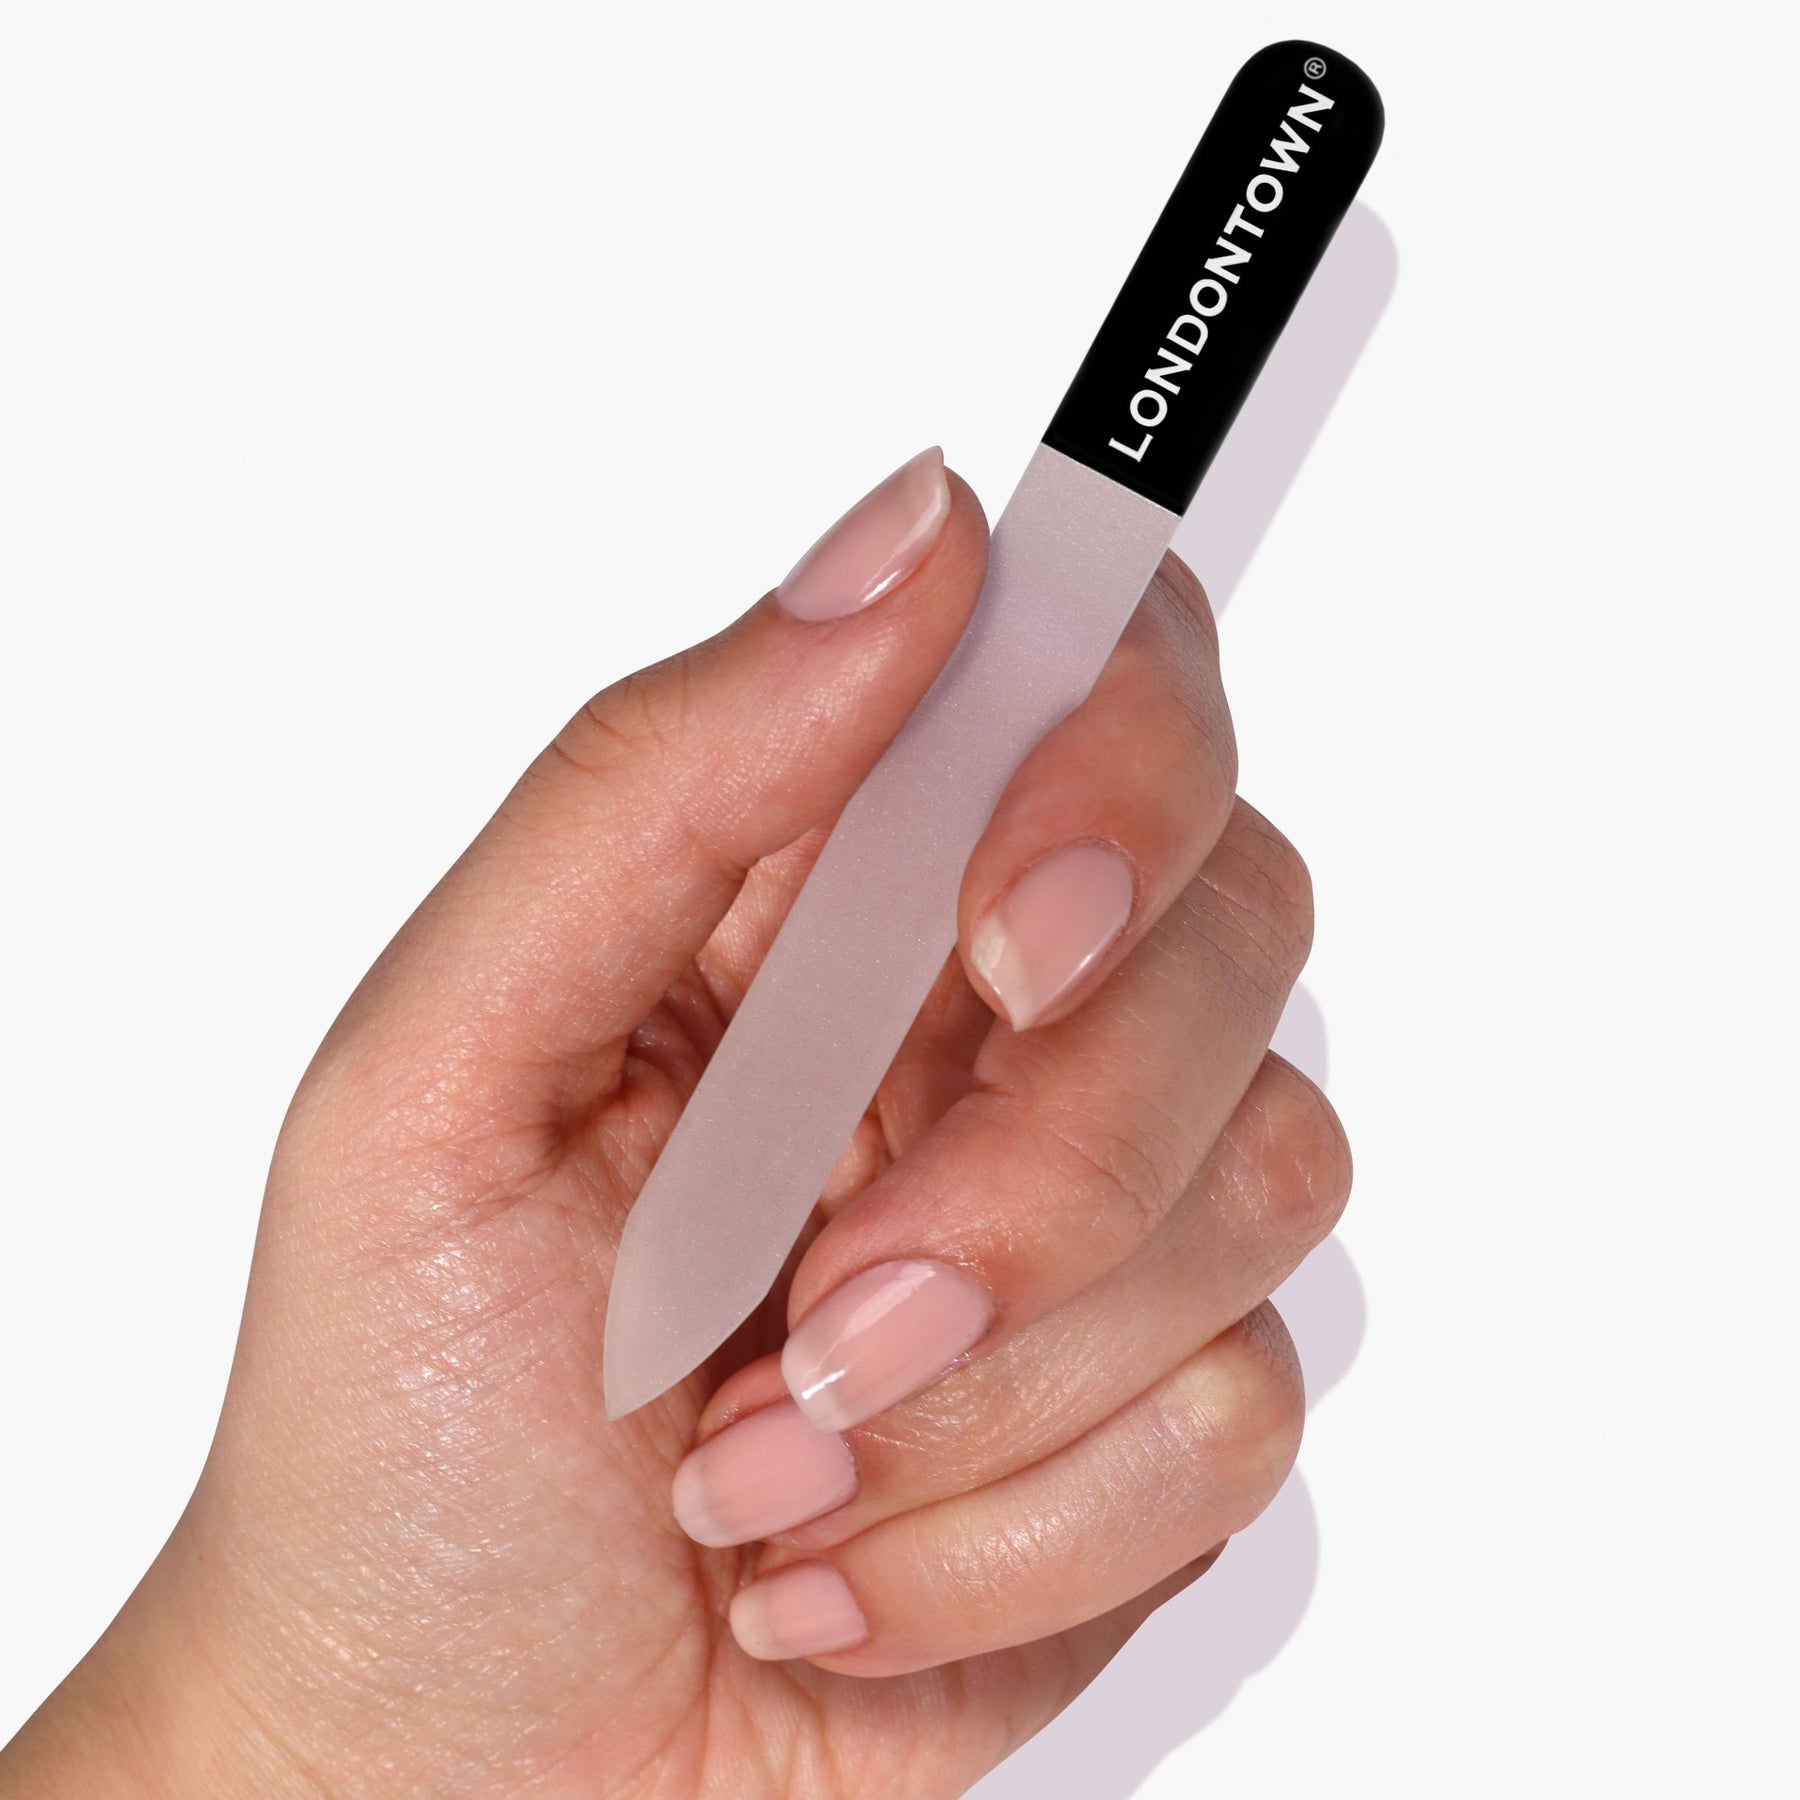 All About Nail Files-What You Need to Know to Use the Right Ones